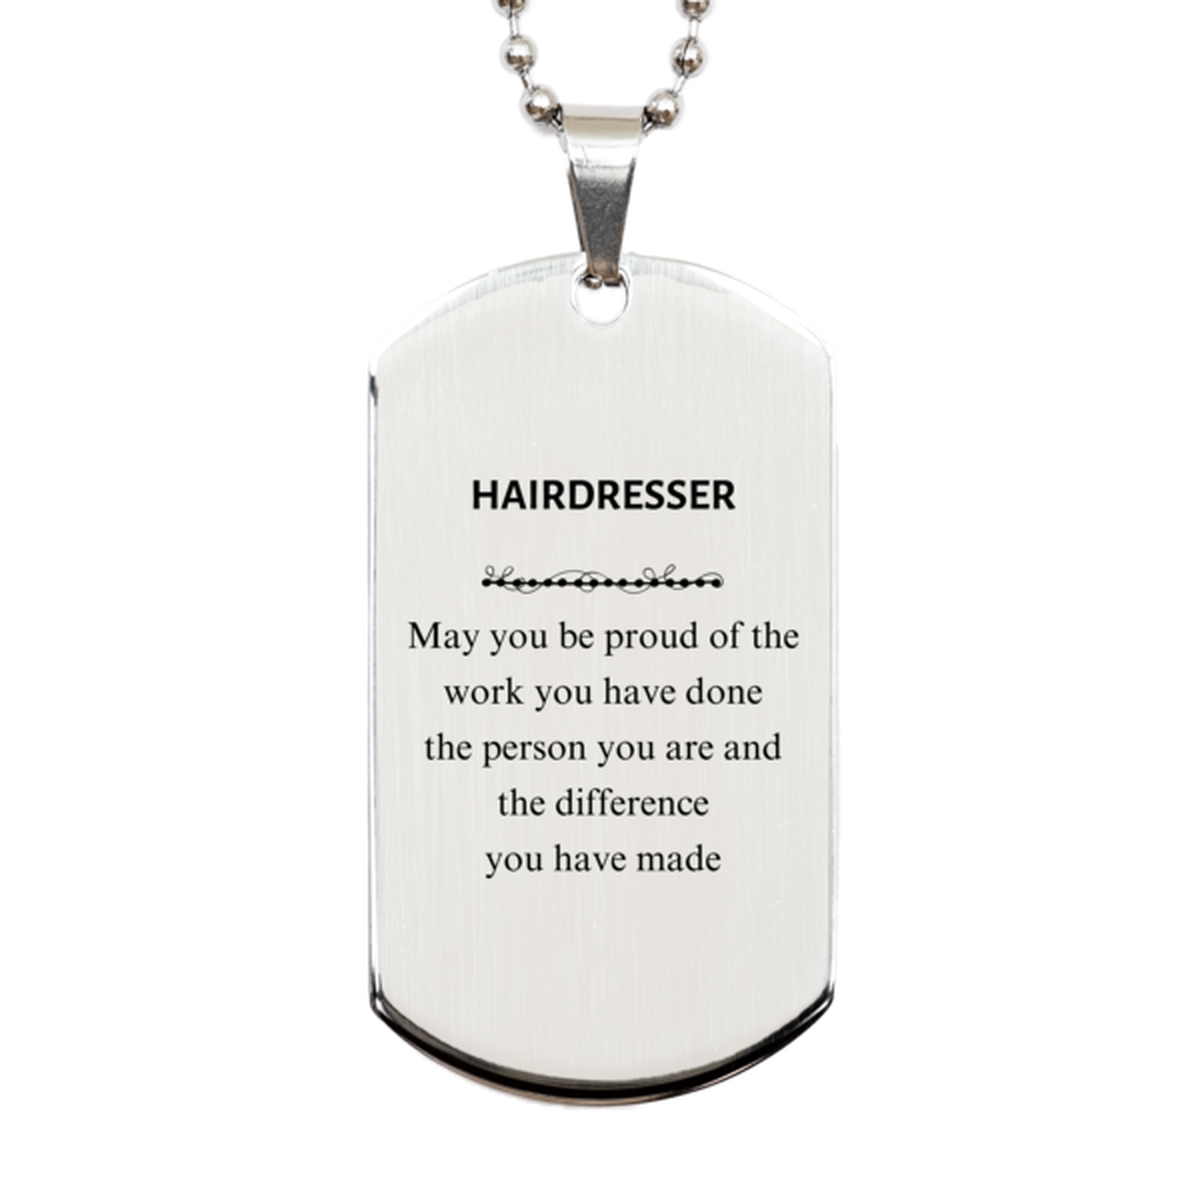 Hairdresser May you be proud of the work you have done, Retirement Hairdresser Silver Dog Tag for Colleague Appreciation Gifts Amazing for Hairdresser